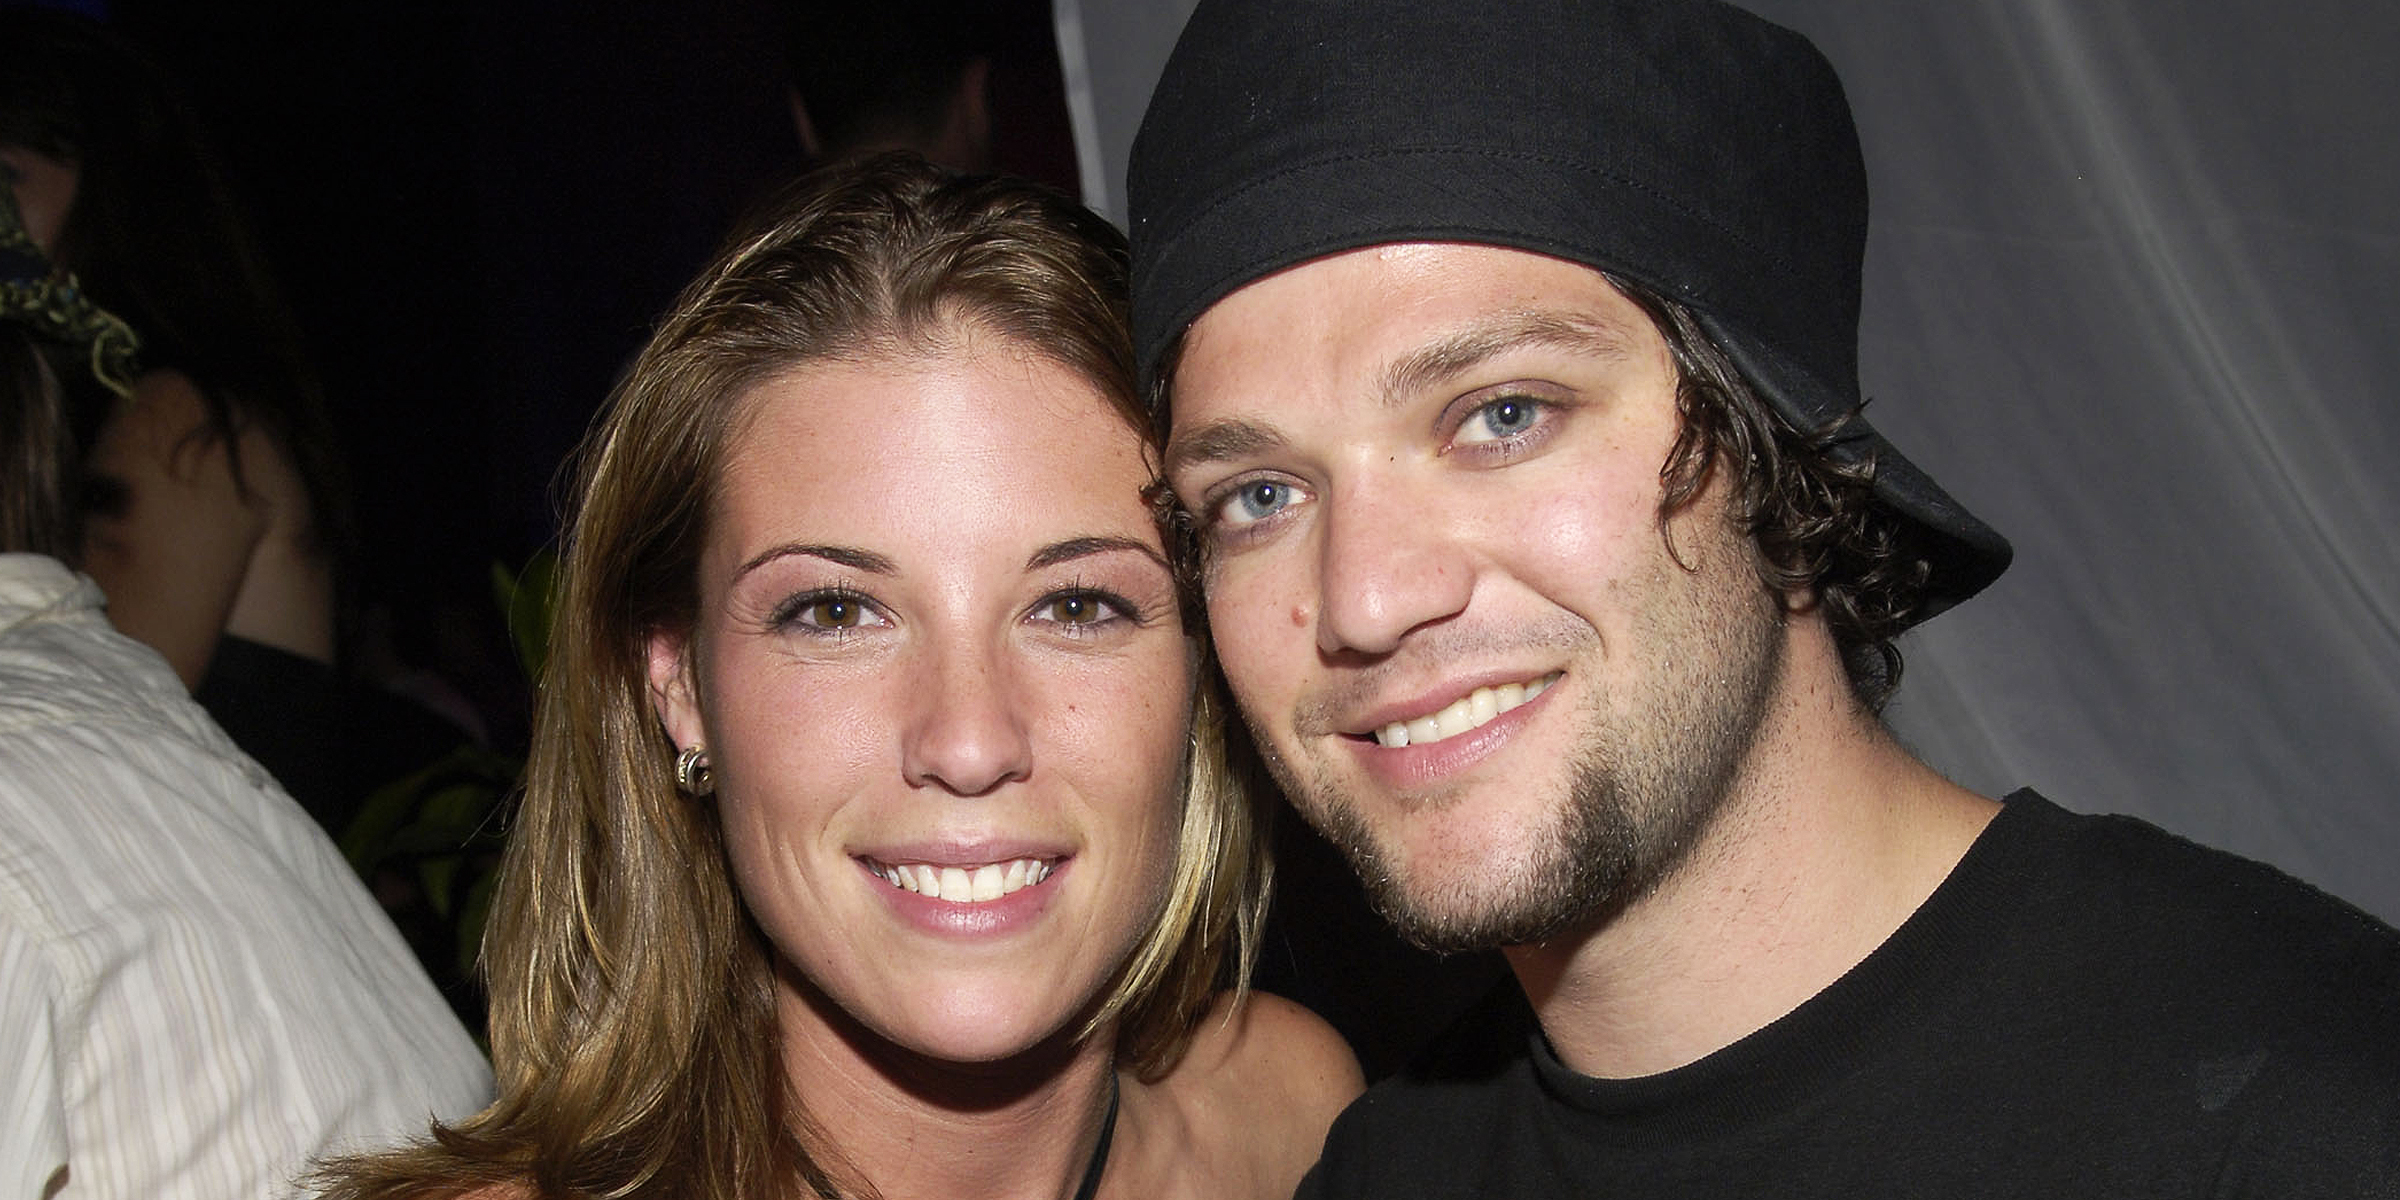 Missy Rothstein and Bam Margera | Source: Getty Images